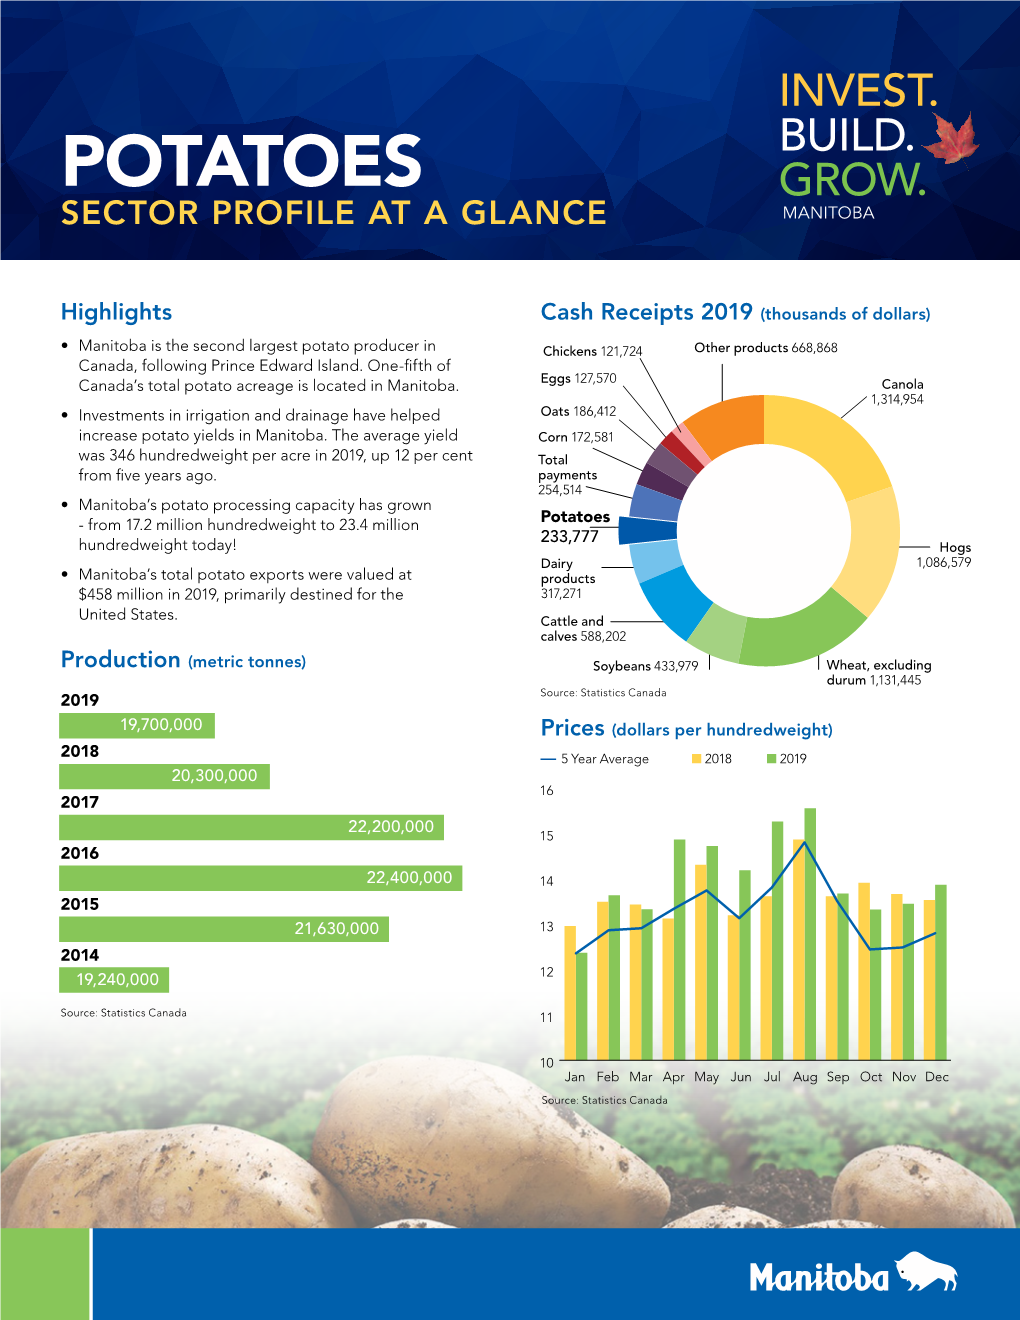 Potatoes Sector Profile at a Glance